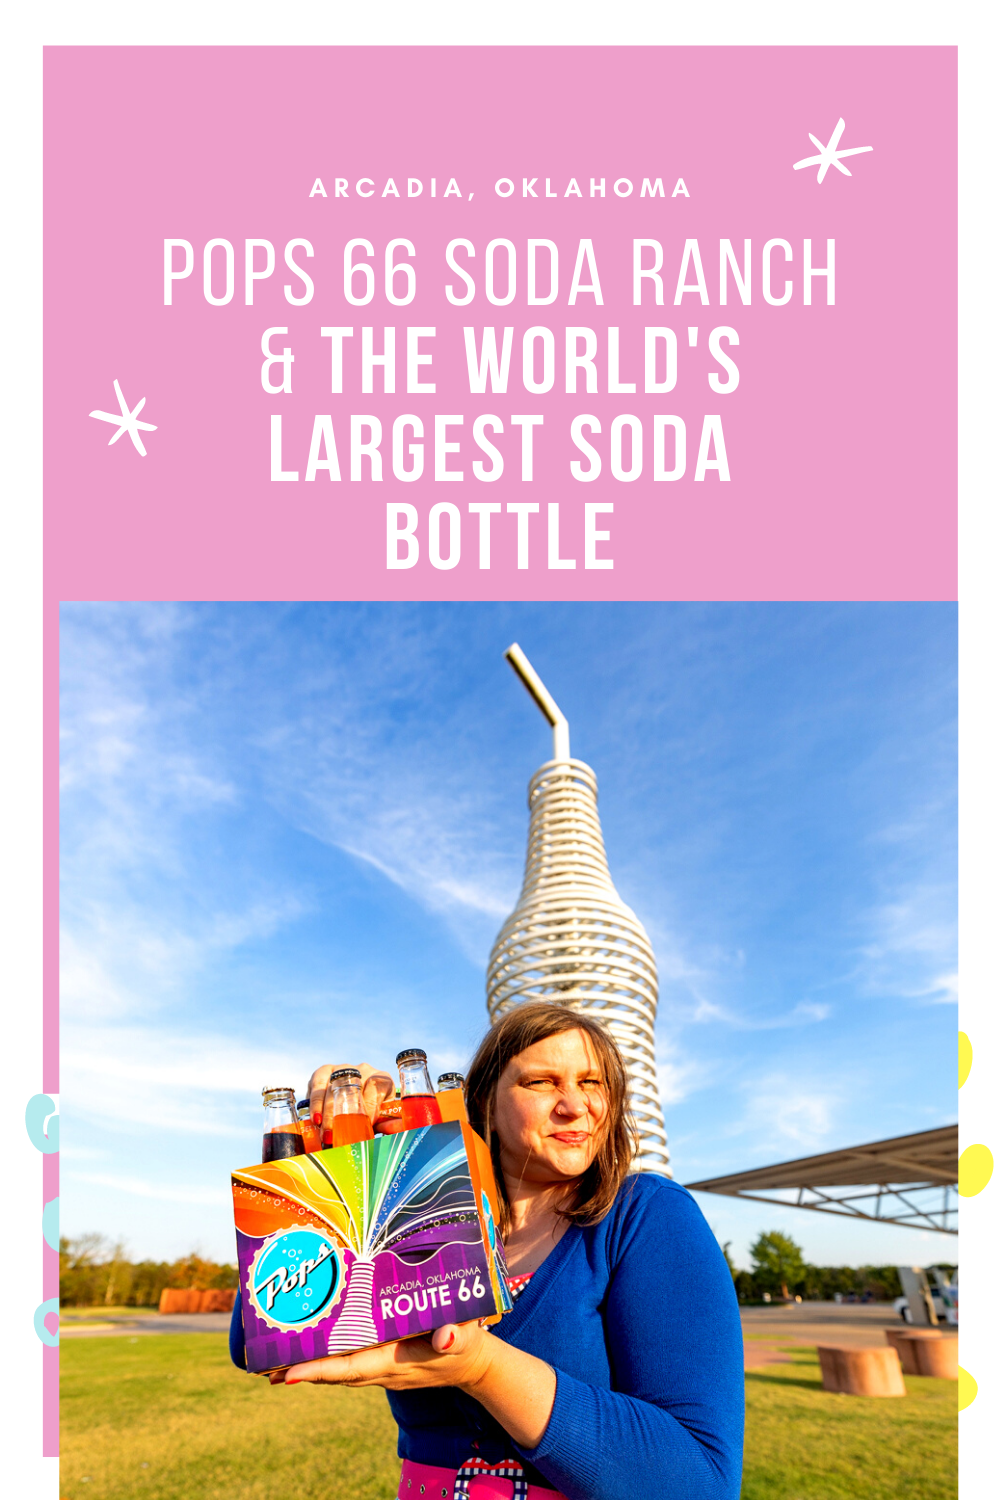 Buffalo wings. Creamed corn. Peanut butter and jelly. You might expect to find any of those items on a diner menu but in Arcadia, Oklahoma you’ll find them on a different type of menu. A soda menu. At Pops 66 Soda Ranch on Route 66 you can try over 700 varieties of soda and see the world’s largest soda bottle while you’re there.  #RoadTrips #RoadTripStop #Route66 #Route66RoadTrip #OklahomaRoute66 #Oklahoma #OklahomaRoadTrip #OklahomaRoadsideAttractions #RoadsideAttraction #RoadTrip